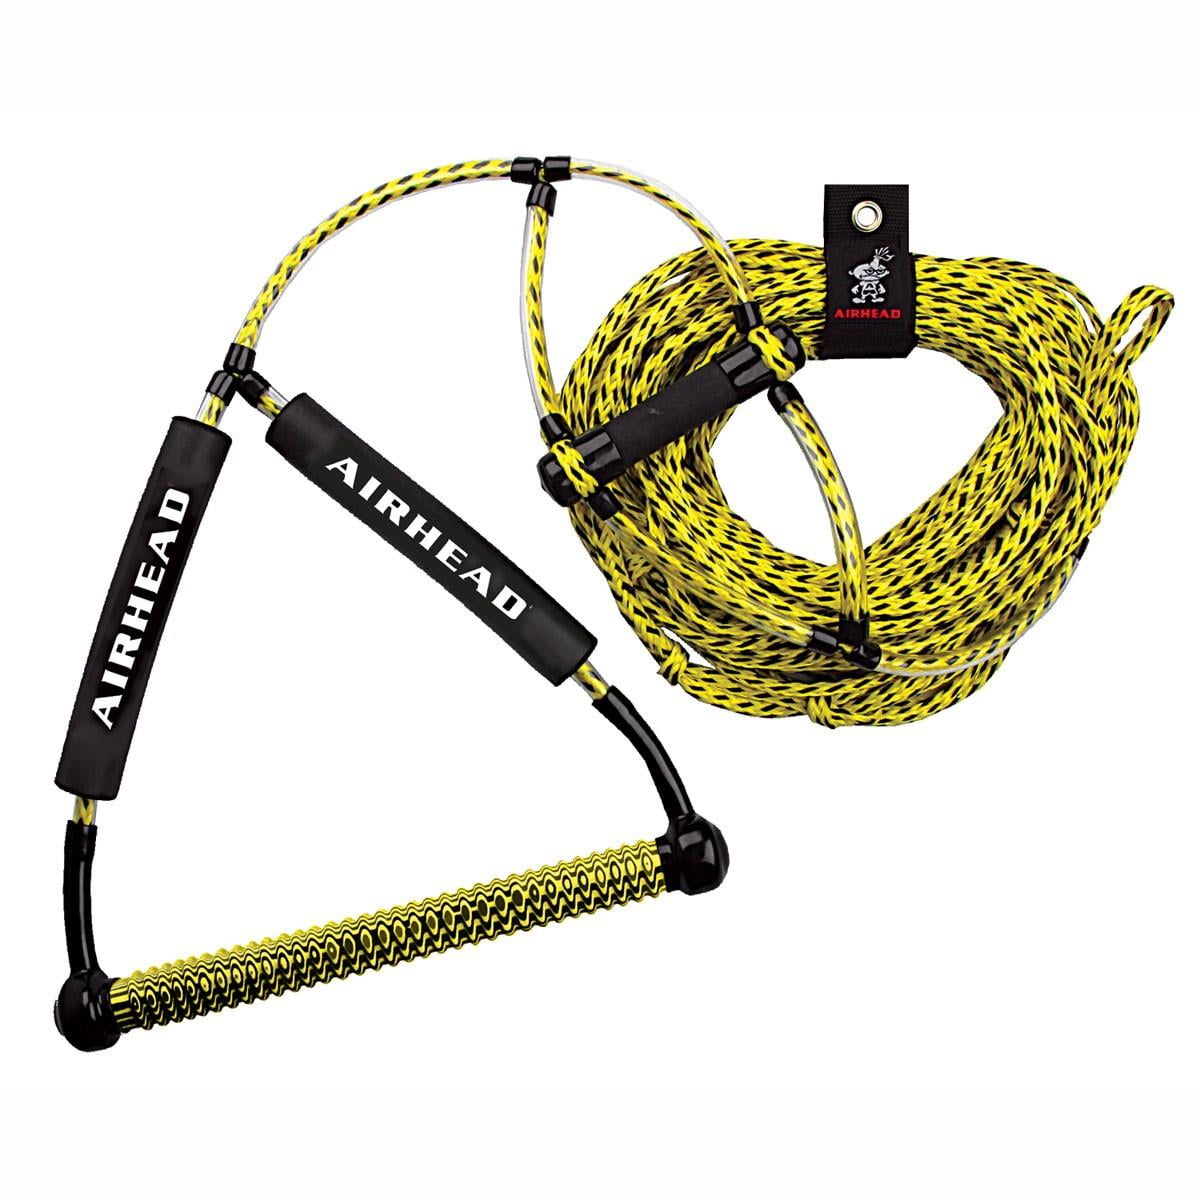 AIRHEAD Bling Spectra Wakeboard Rope 75' 5 Section for sale online 